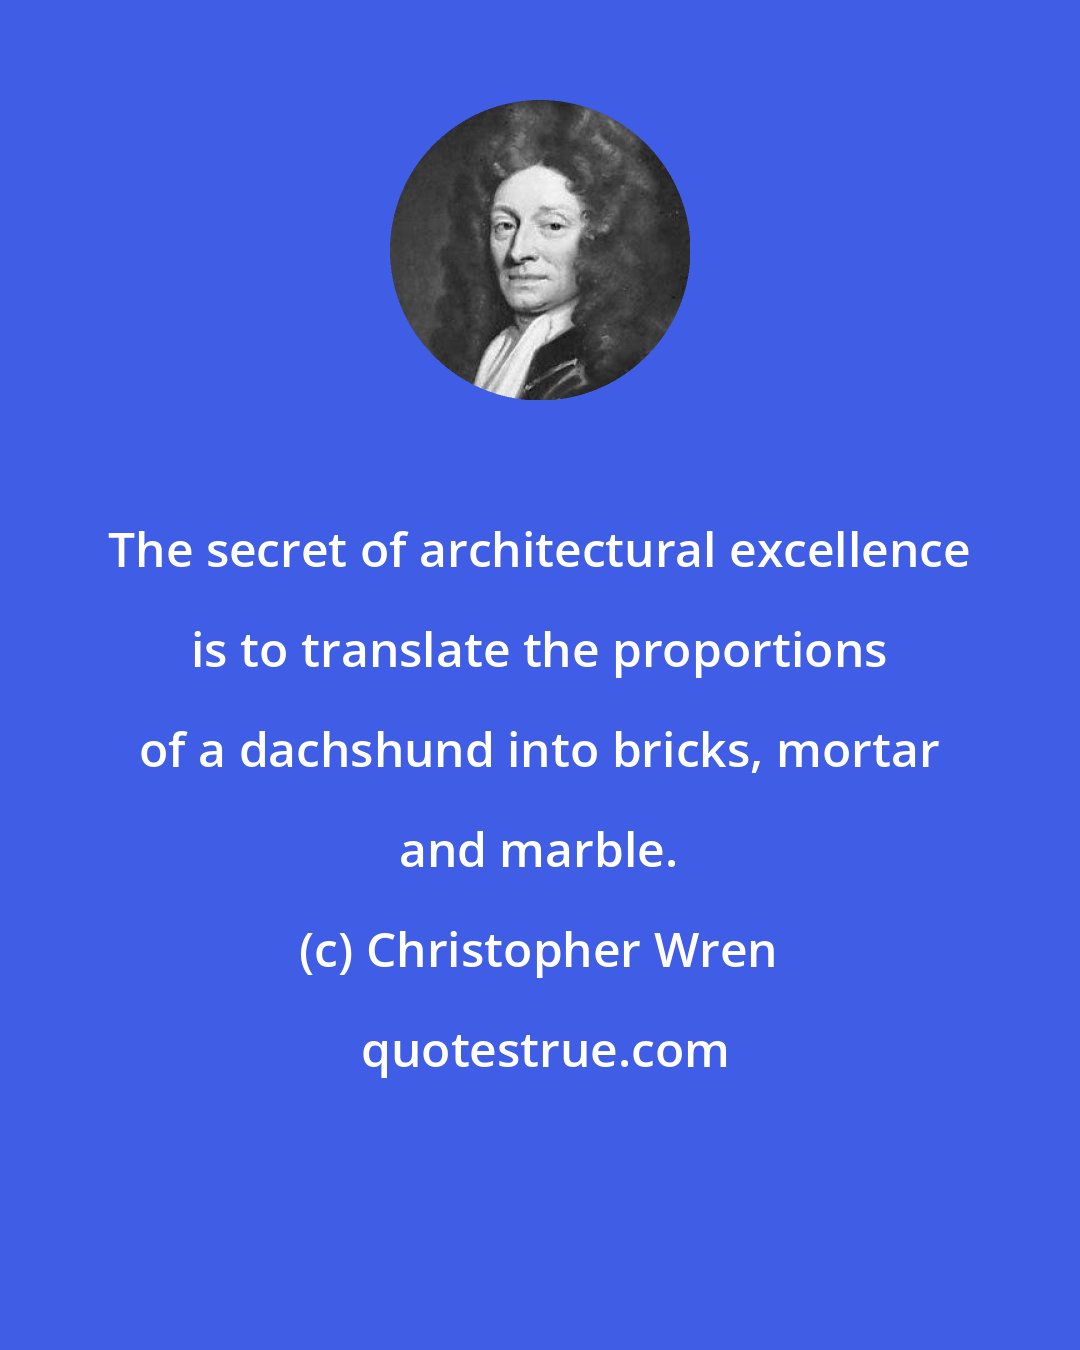 Christopher Wren: The secret of architectural excellence is to translate the proportions of a dachshund into bricks, mortar and marble.